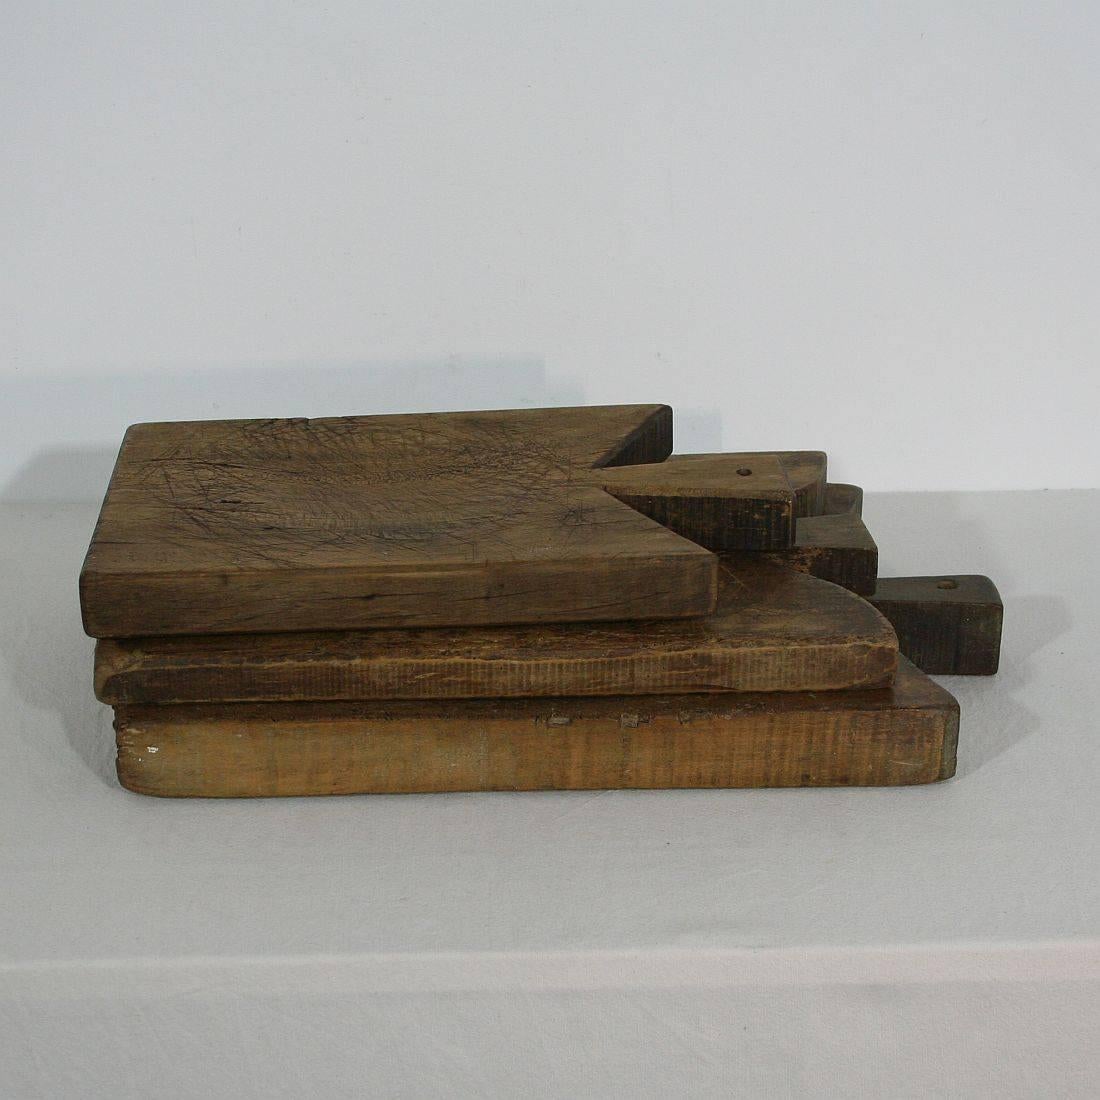 Beautiful small collection of three wooden chopping-cutting boards. Great statement on your counter-top
France, circa 1850-1900. Weathered.
Measure: H 38-48.5cm (15-19in), W 23.5-32cm (9-12.5in), D 3.5-4.5cm (1.25-1.75in) each, together: D 12cm(